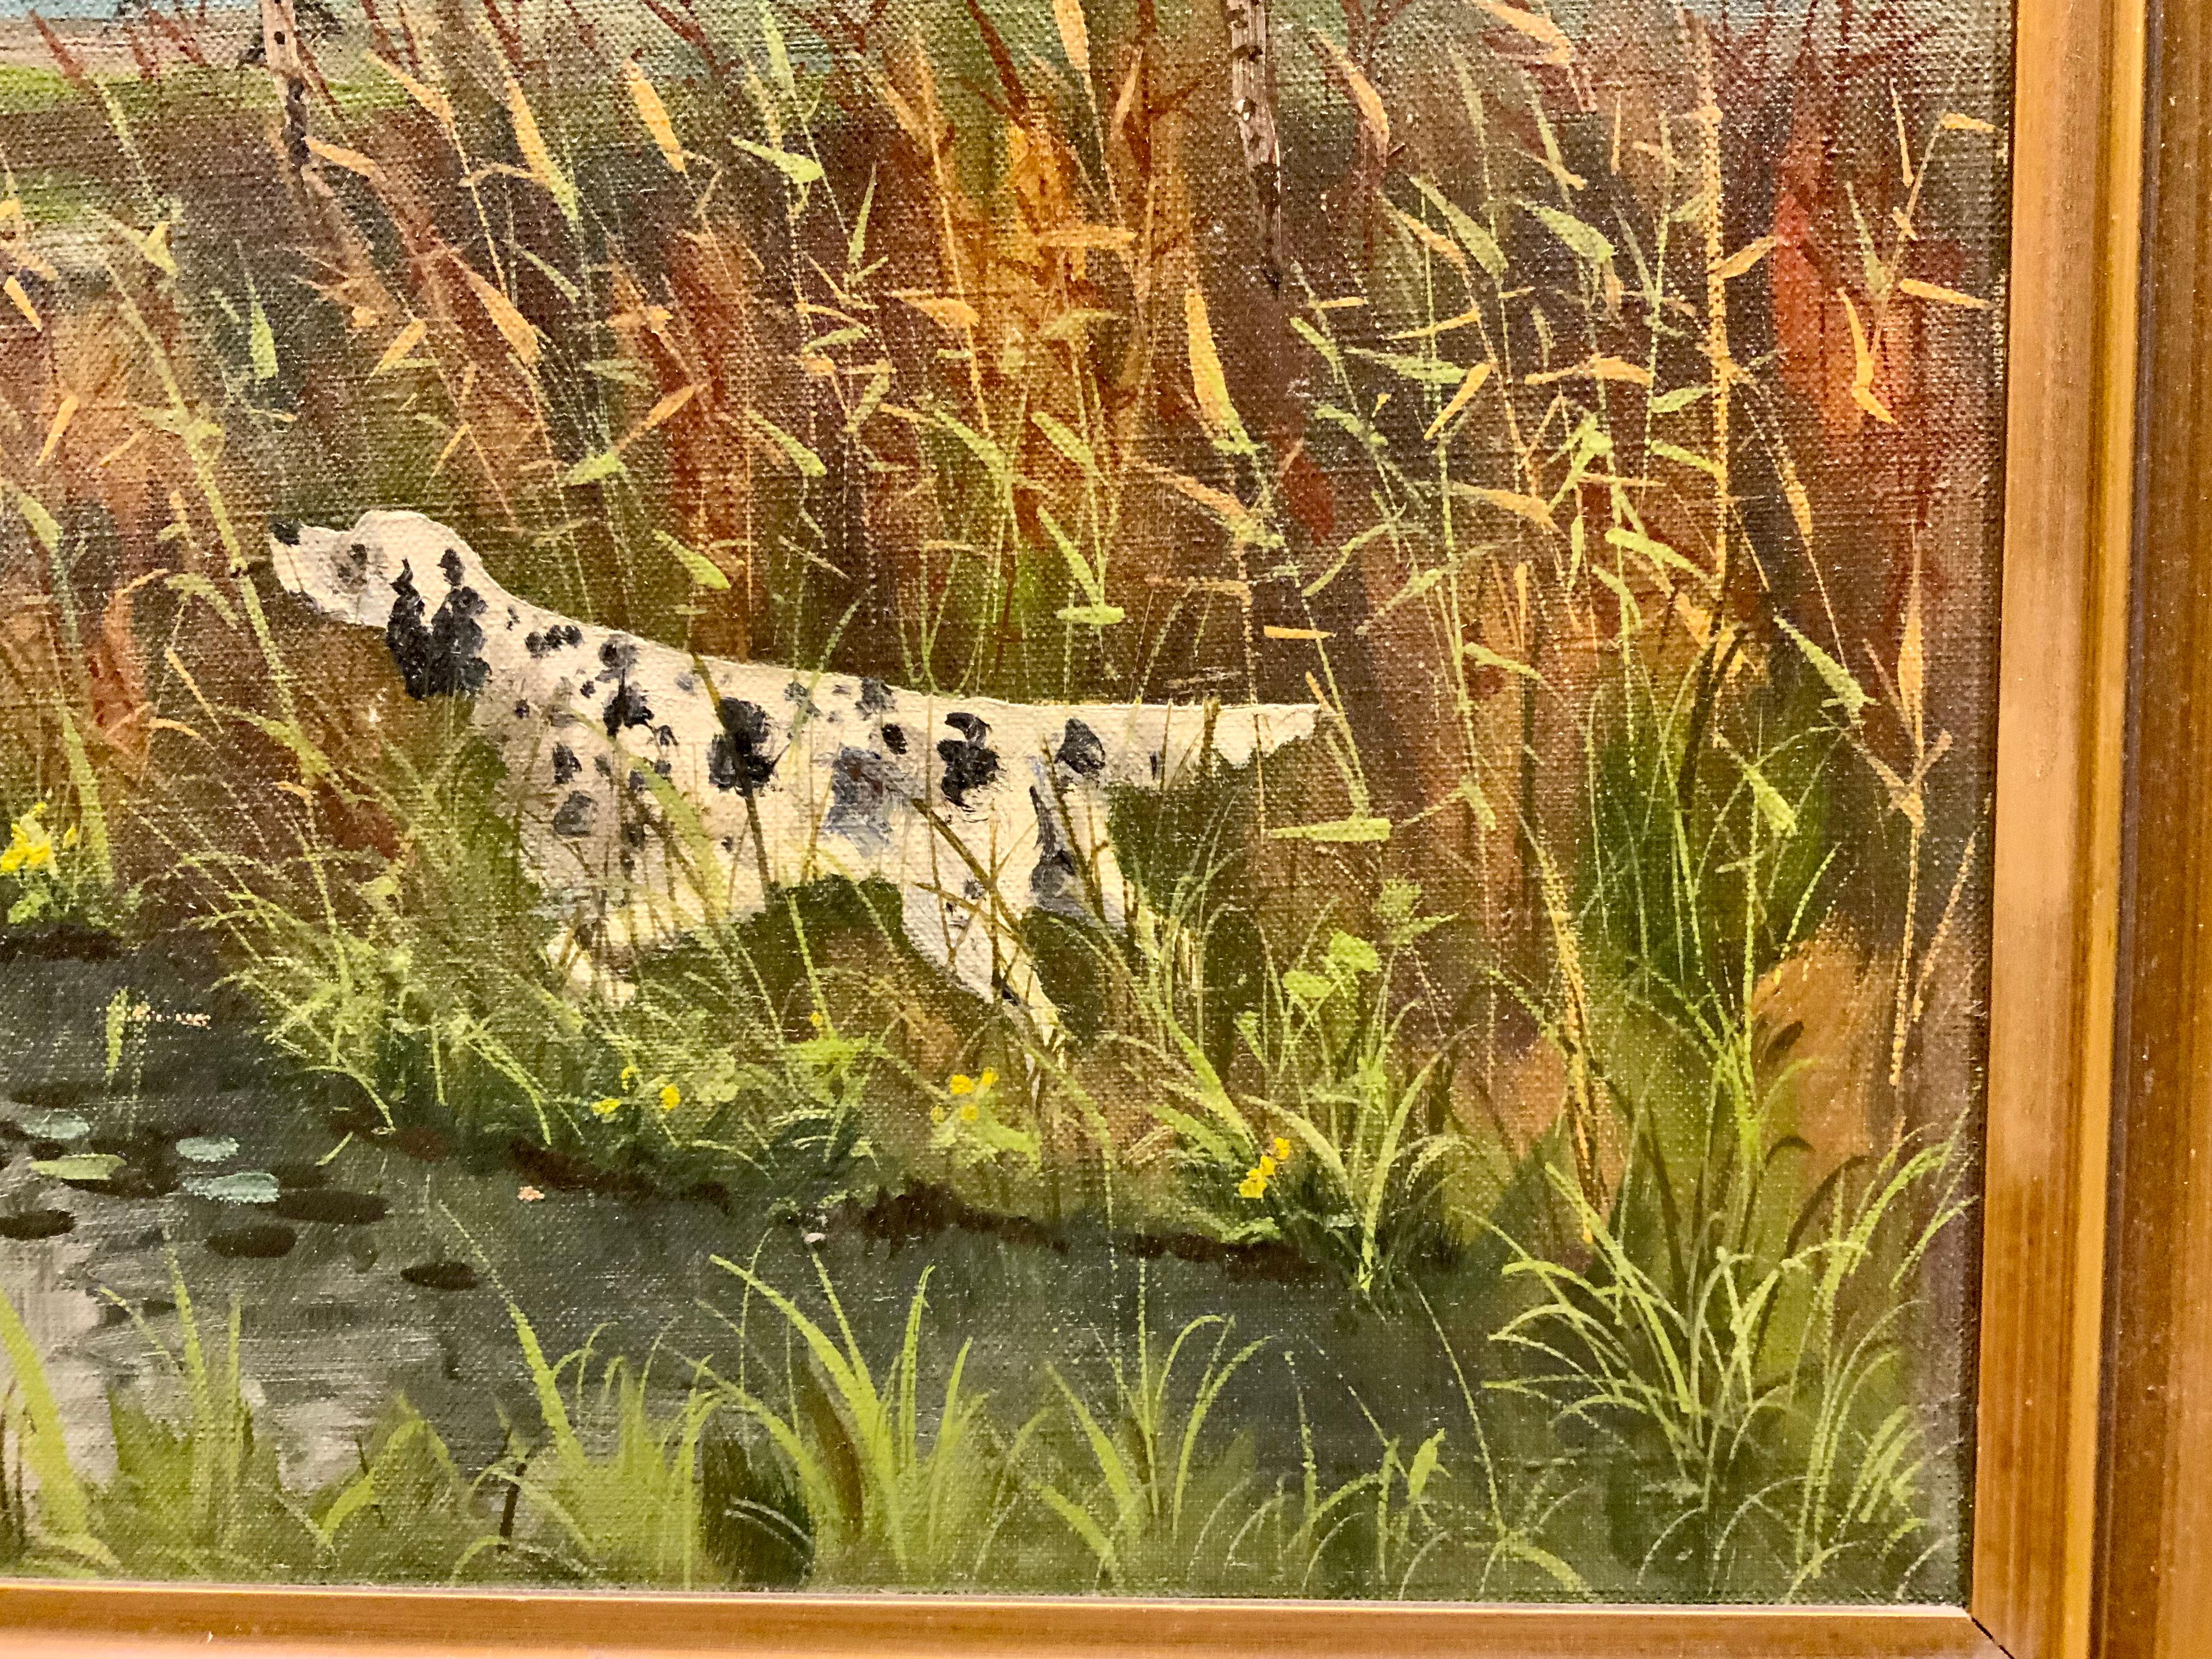 This unique painting has an appeal to hunters and dog lovers,
As it represents a special scene with a hunting dog tracking
Ducks. The sky is well painted and the overall view of a
Marshy hunting scene is perfect for someone that loves
The great